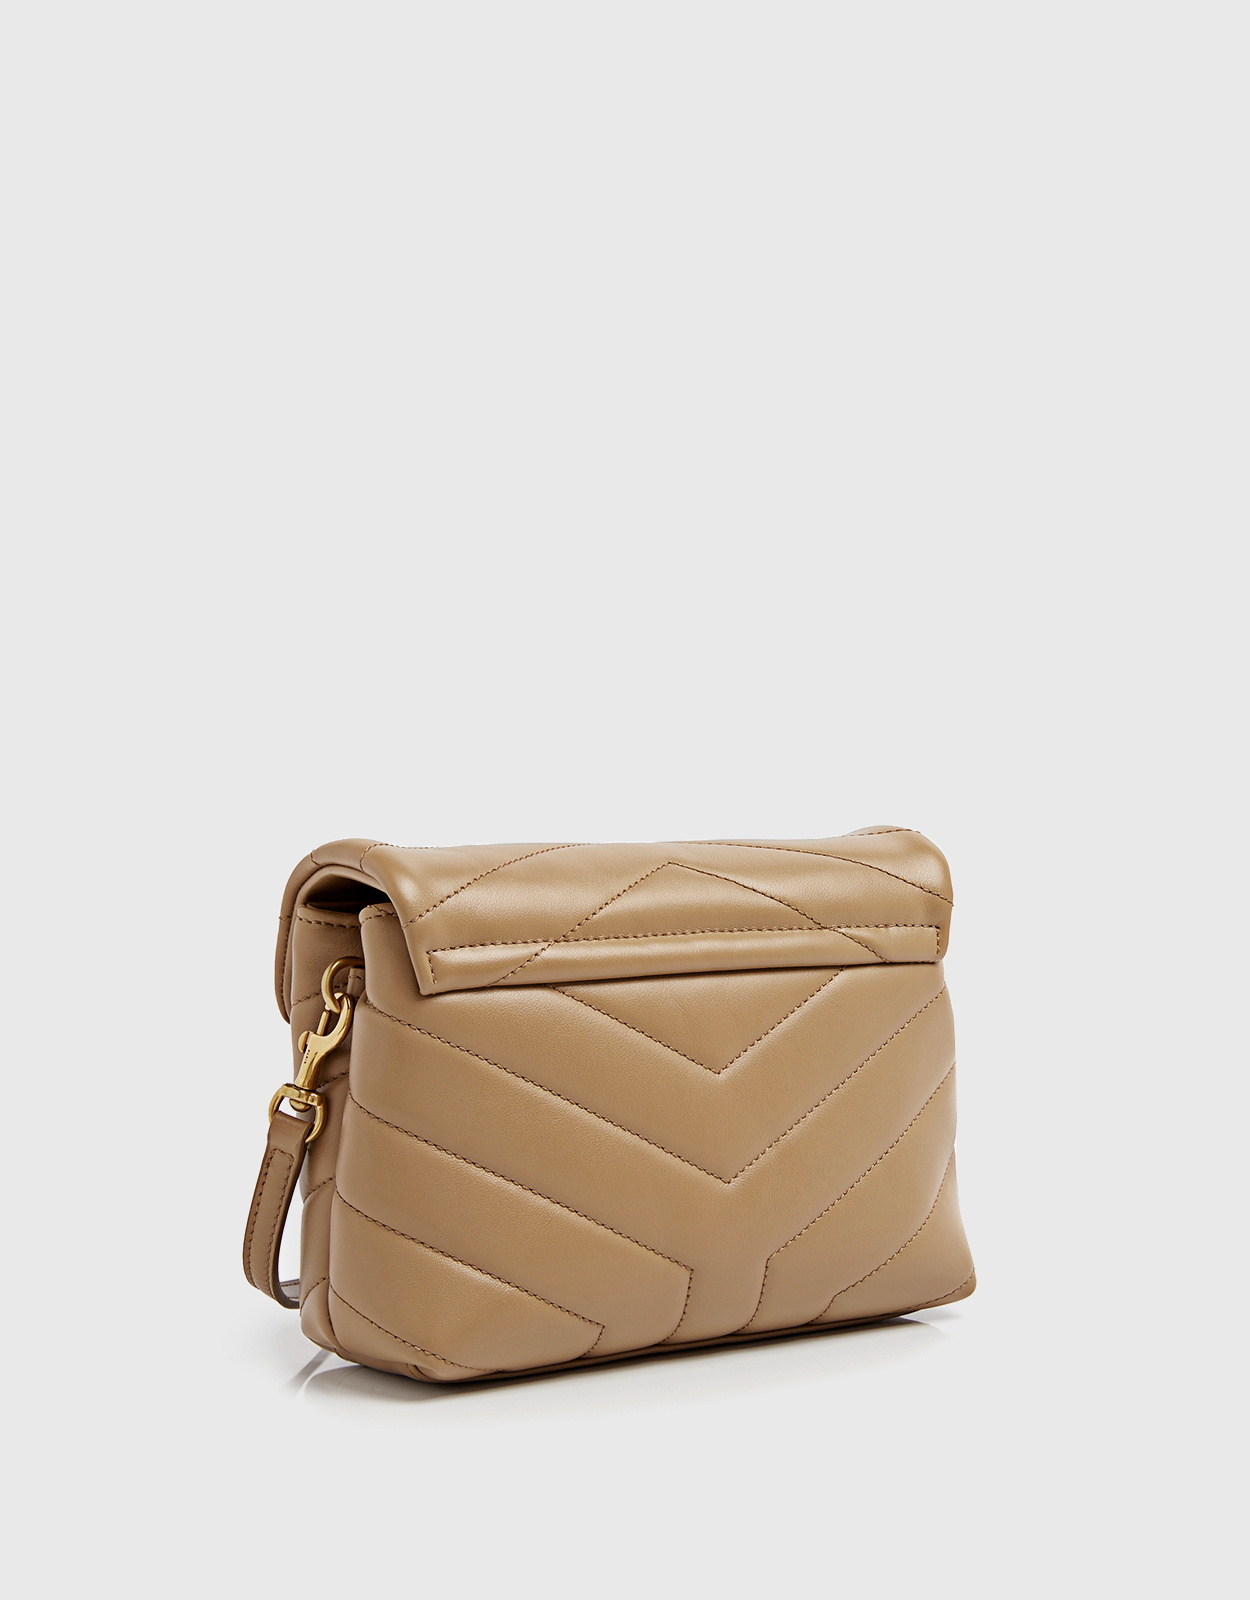 Loulou leather crossbody bag Saint Laurent Beige in Leather - 35520653